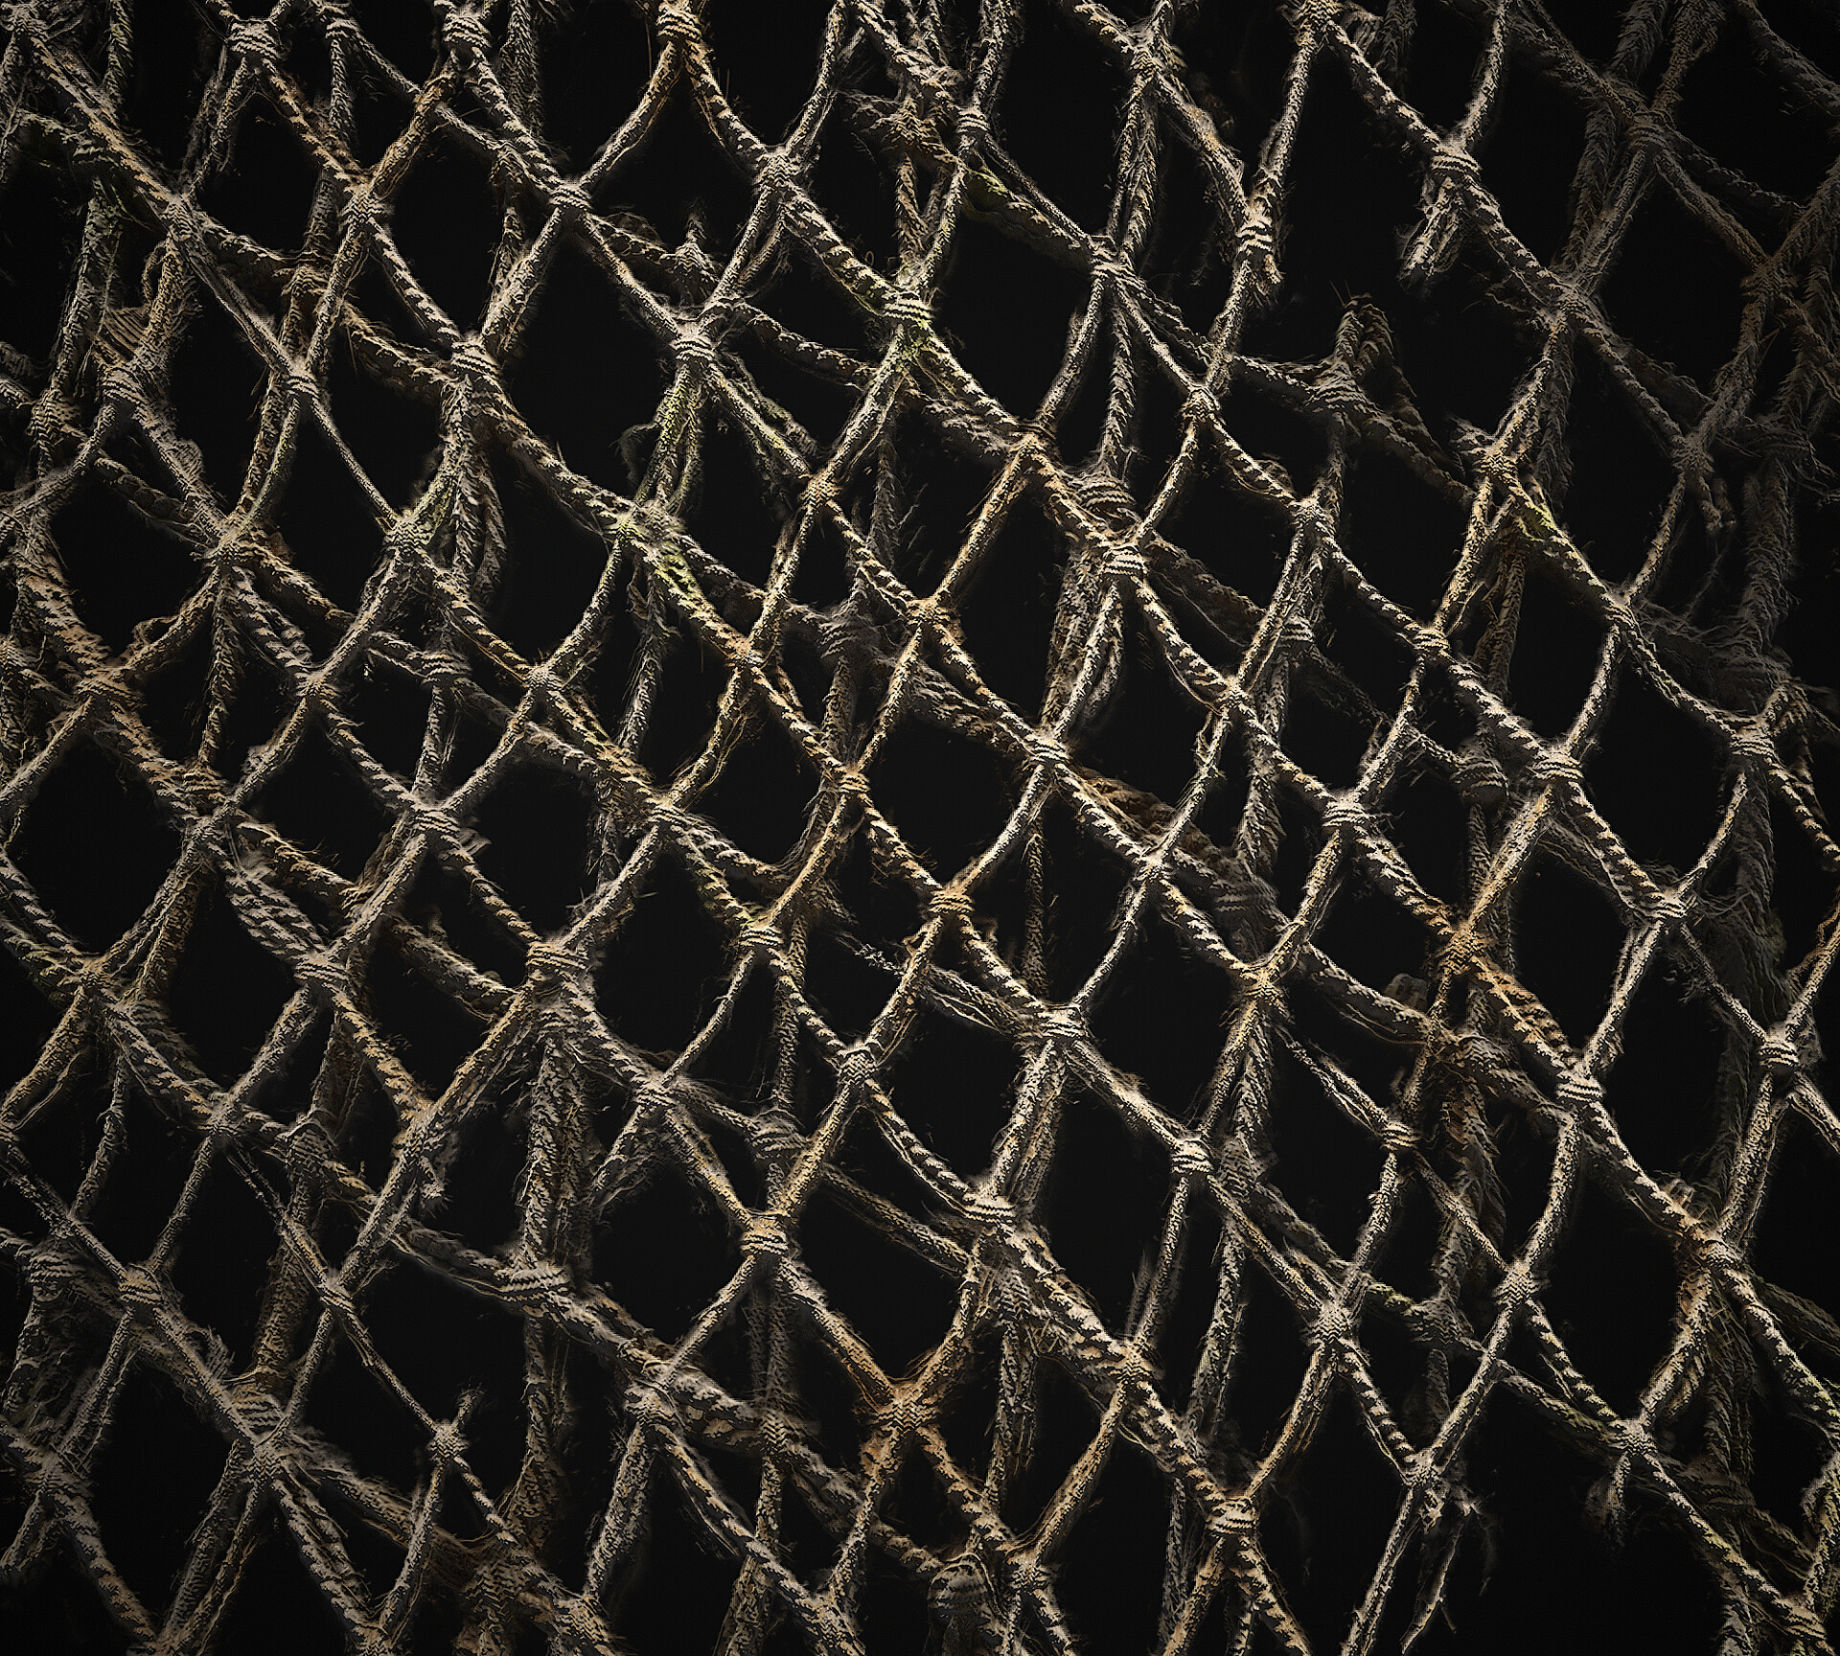 Creating Procedural Fishing Nets Material in Substance 3D Designer